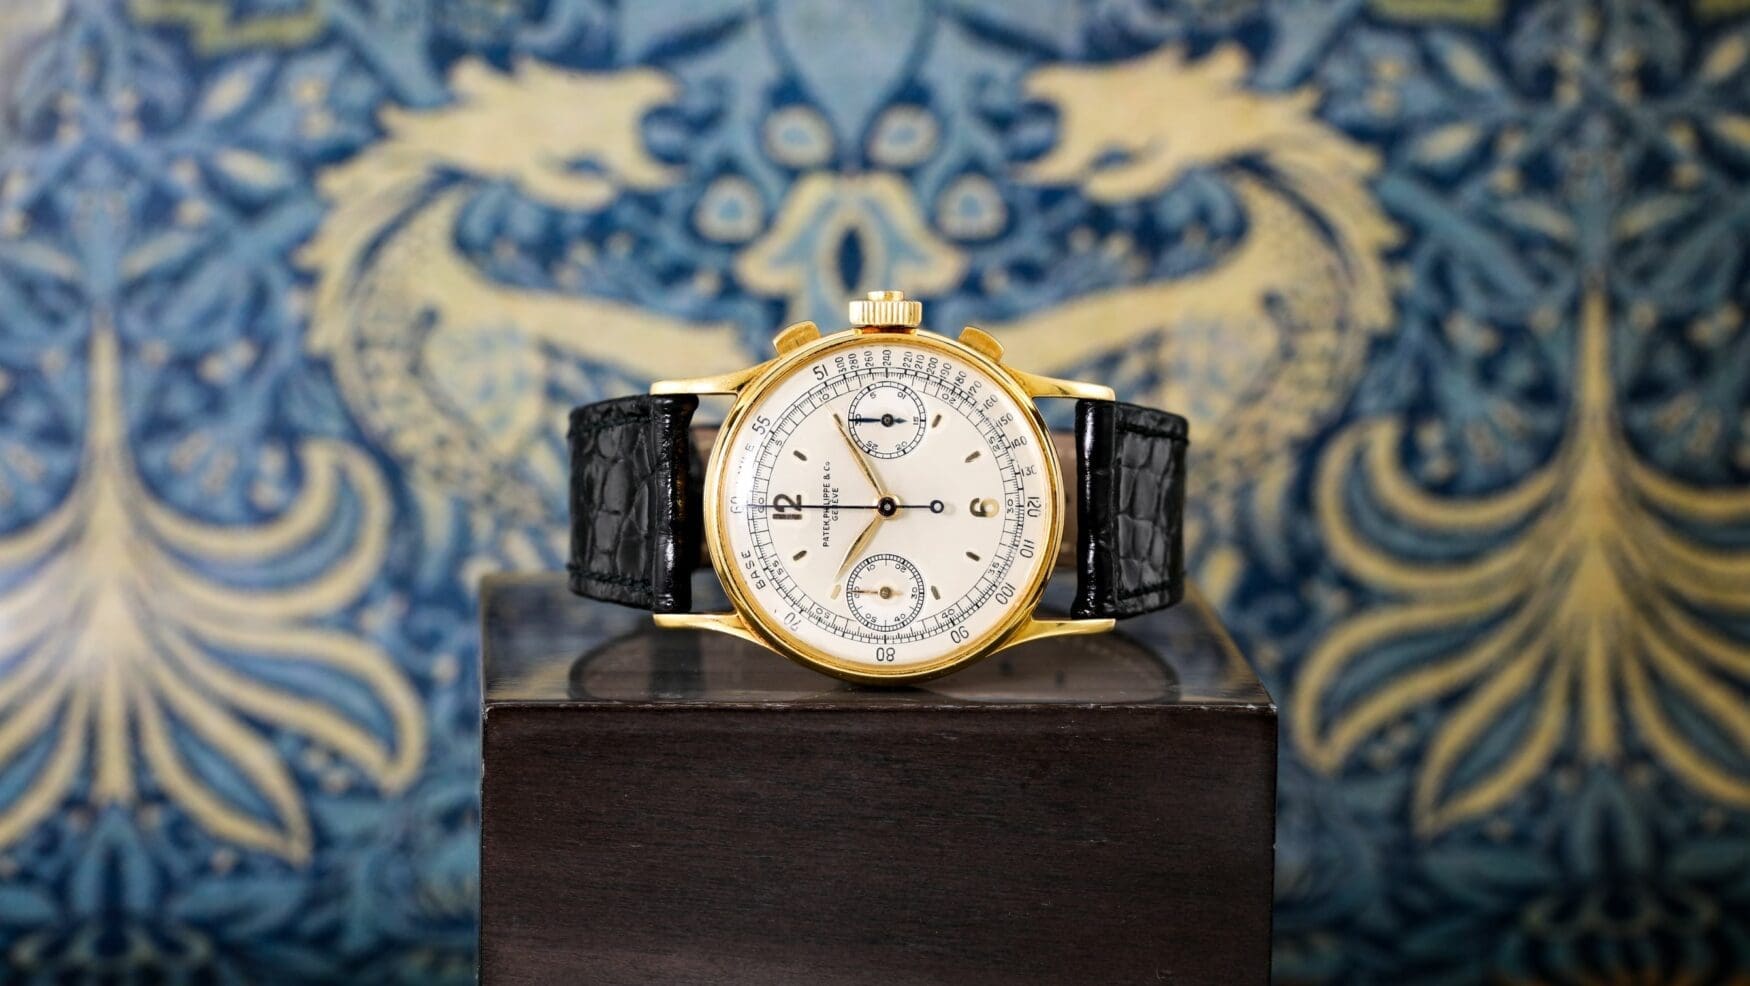 A 1946 Patek Philippe just became the highest-value watch ever sold in Australia